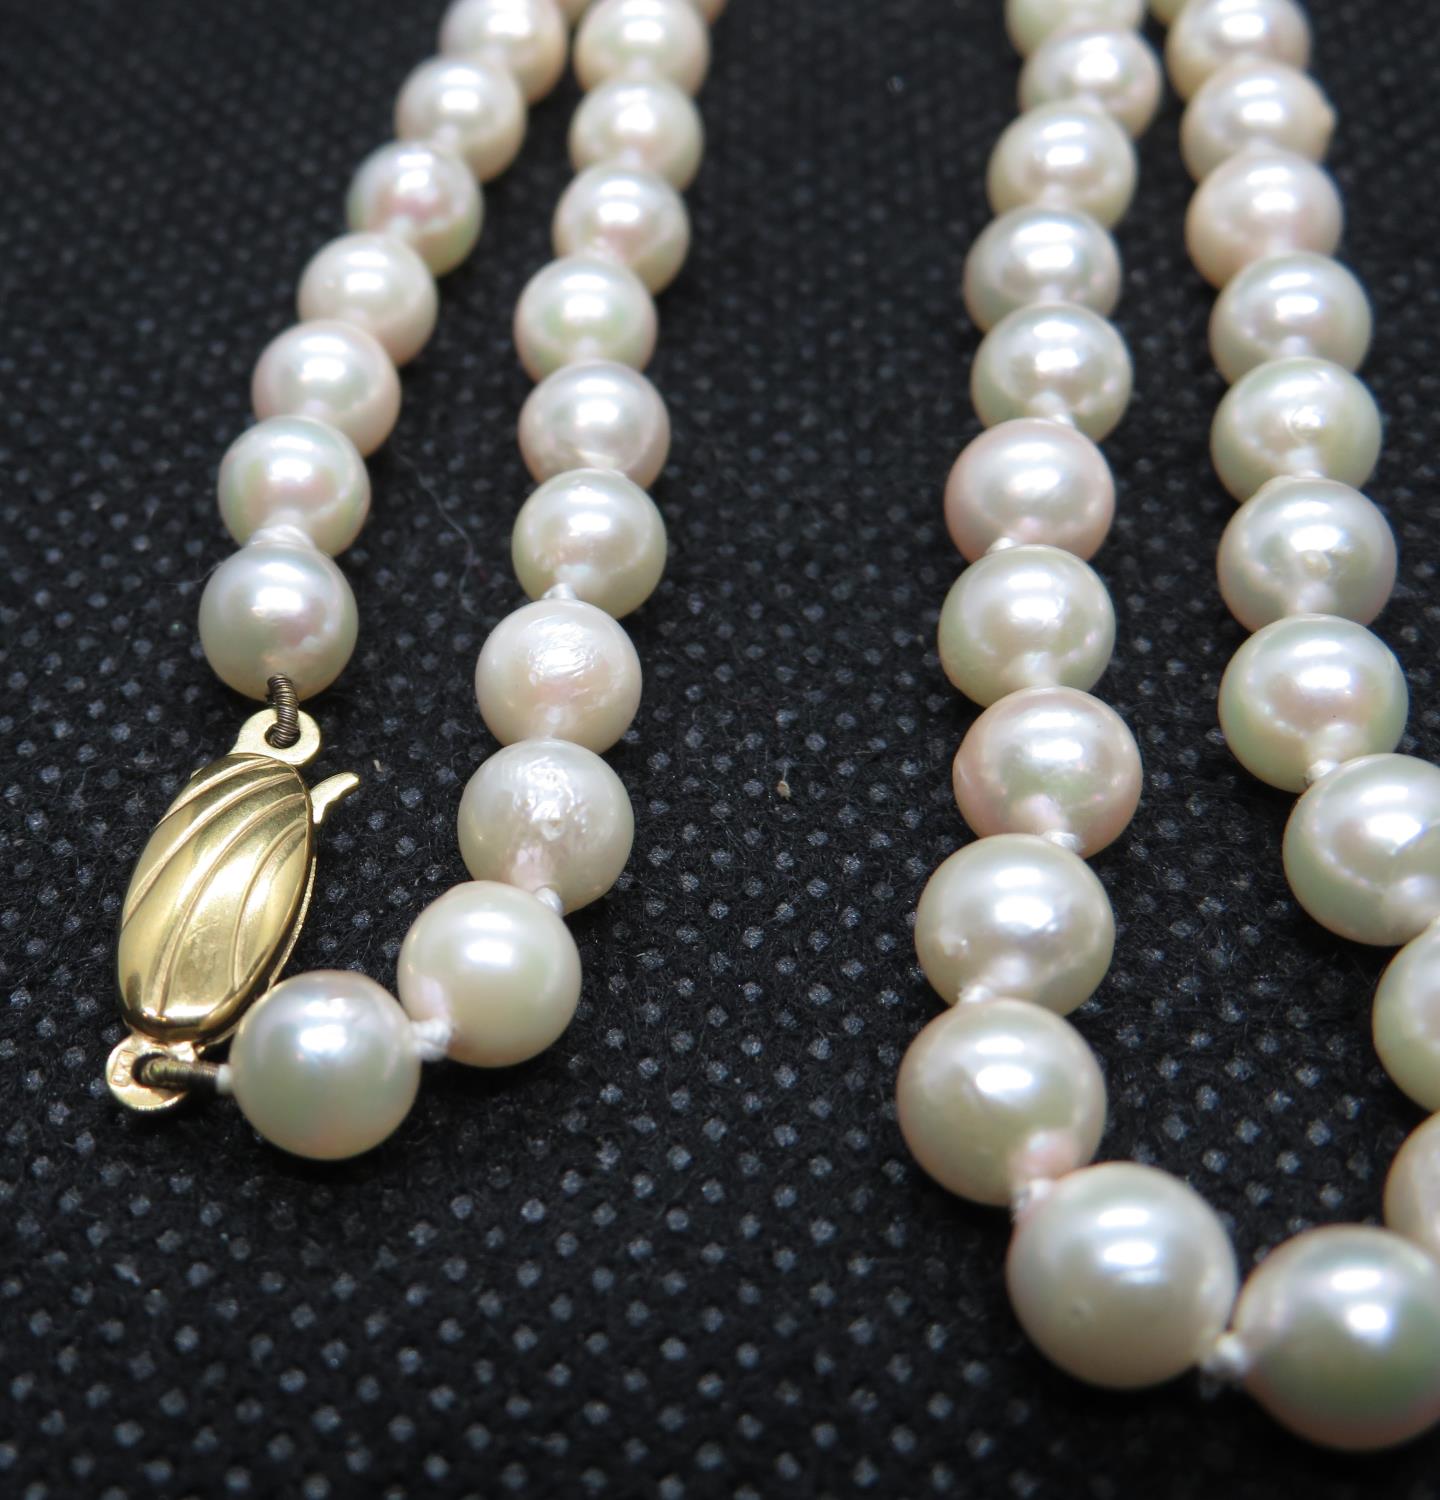 16" rope of 5.5mm cultured pearls with 9ct gold clasp - Image 2 of 2